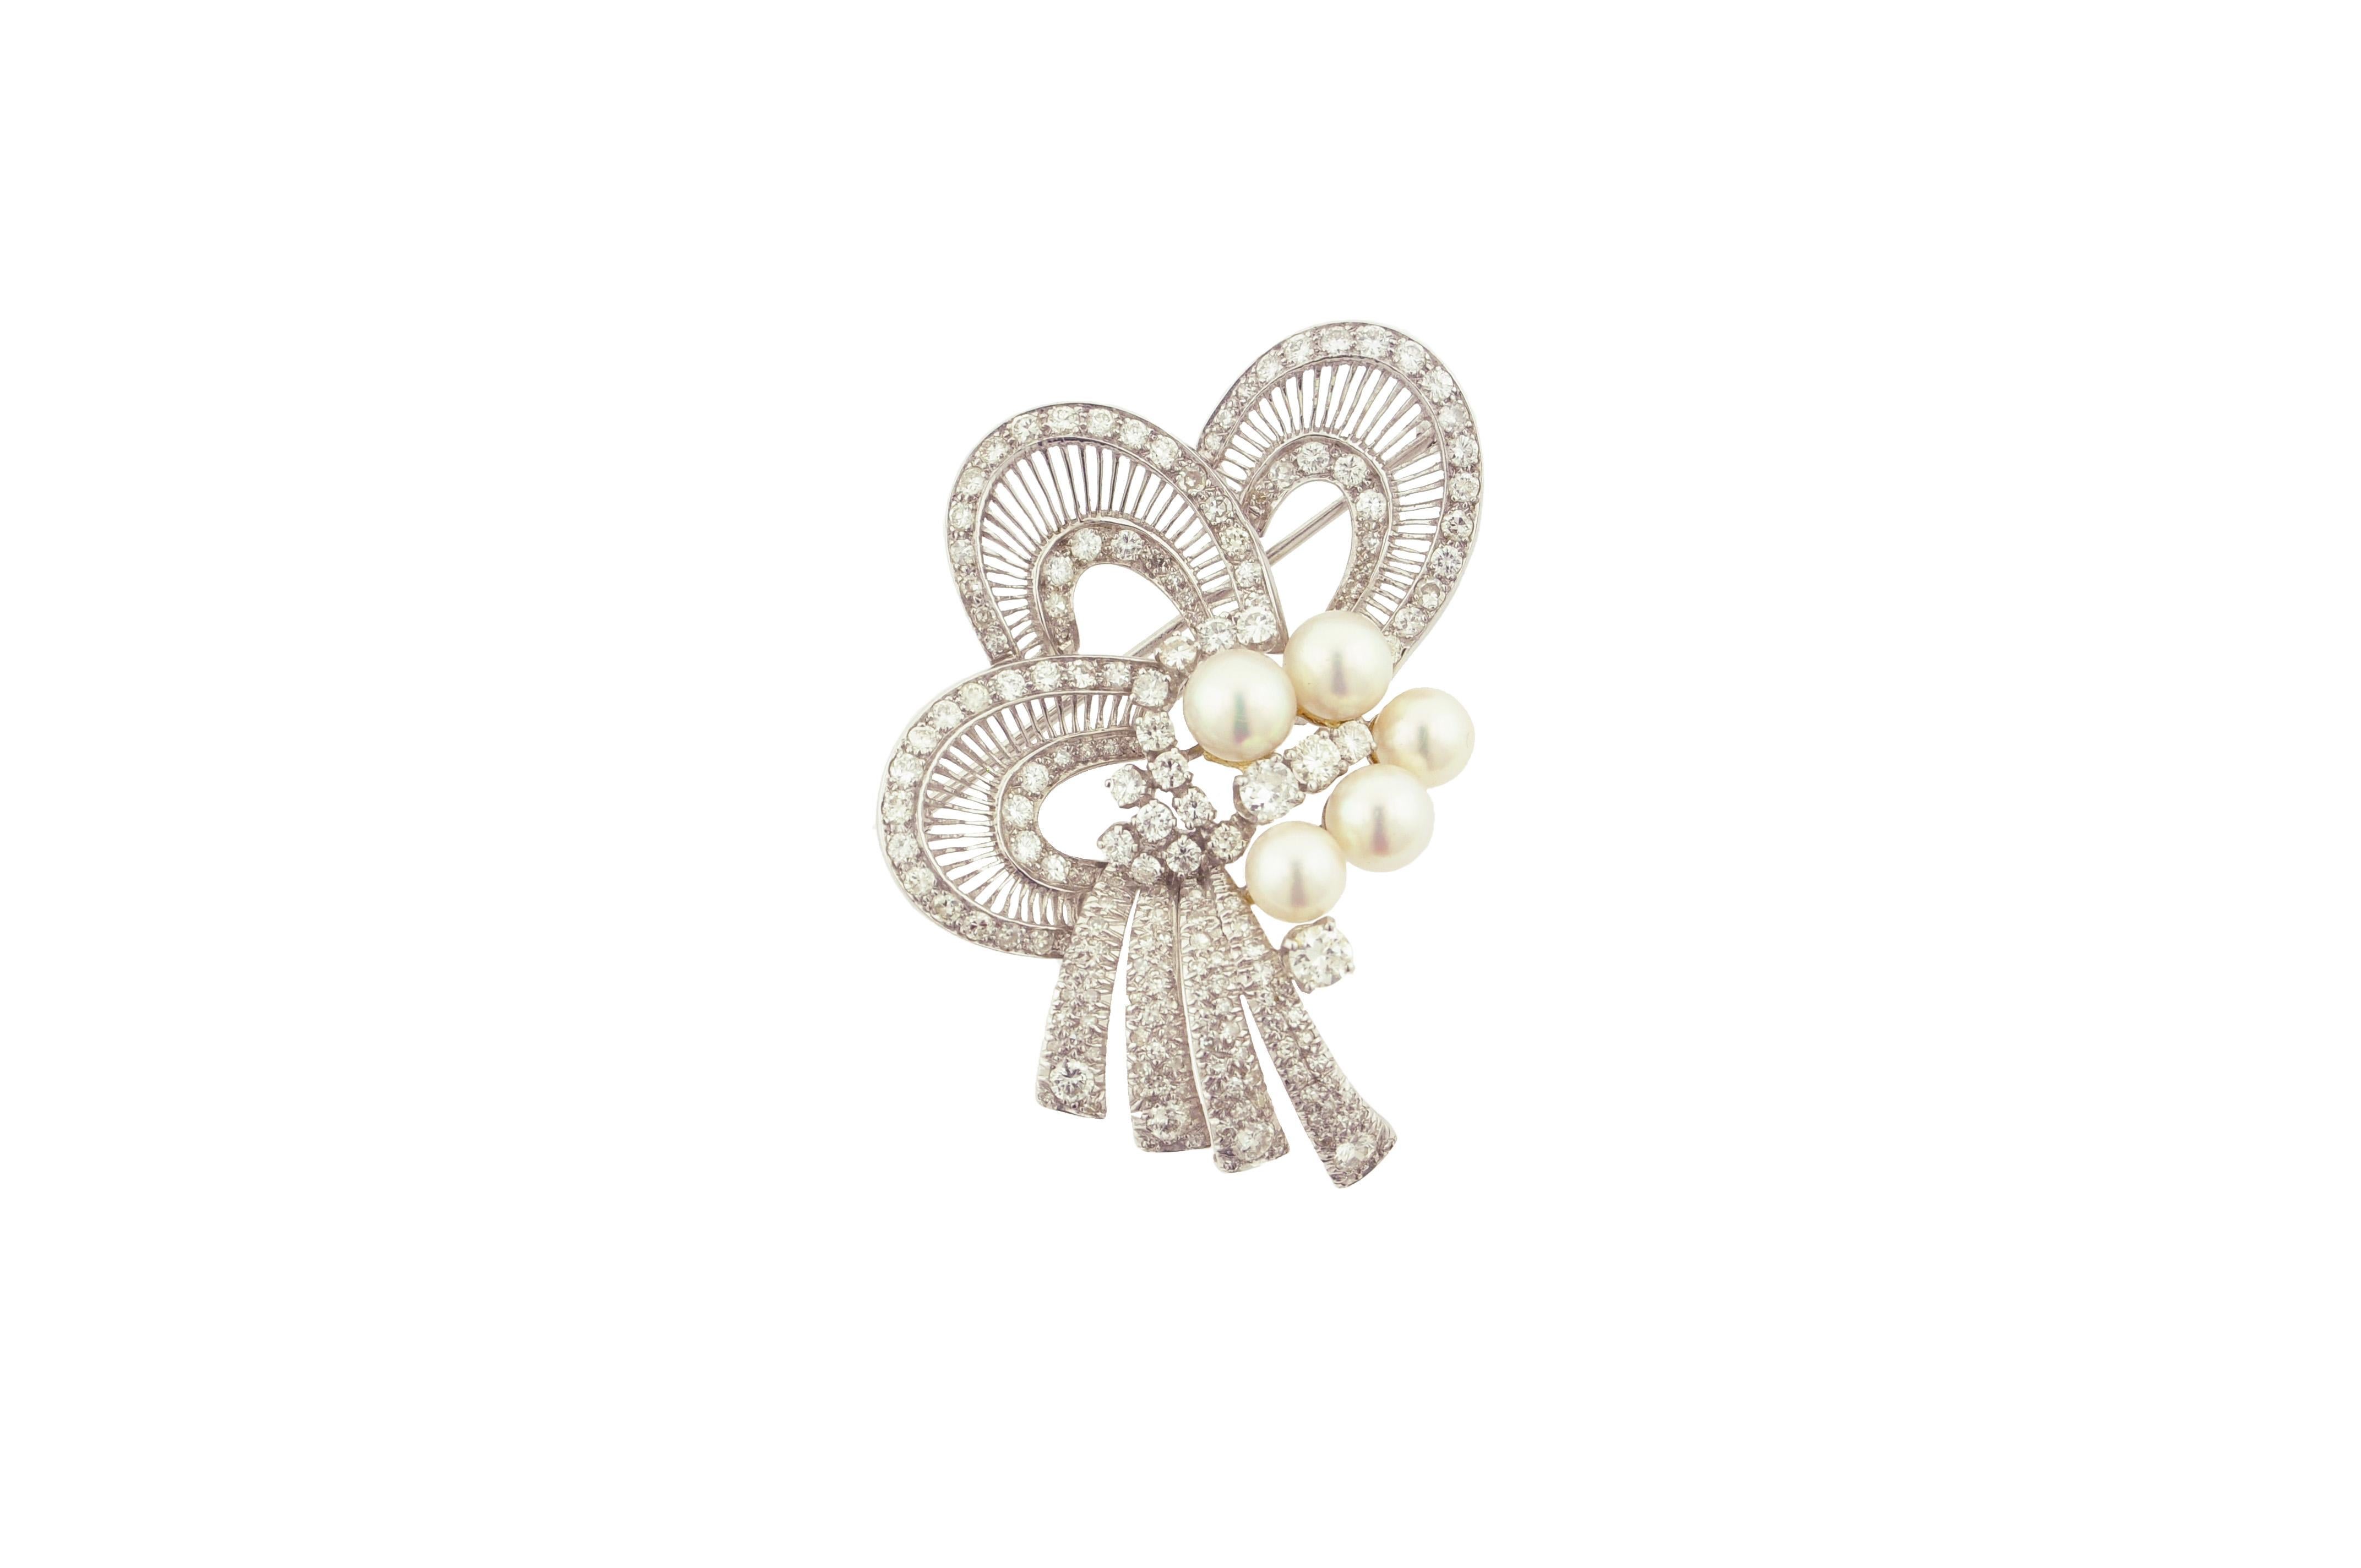 Beautiful pearl and diamond brooch set in 18 karat white gold.

5 cultured pearls ranging from 7.00mm to 7.80mm.

17 round diamond weighing approximately 1.70 carats

130 diamond weighing approximately 2.60 carats

Total diamond weight is